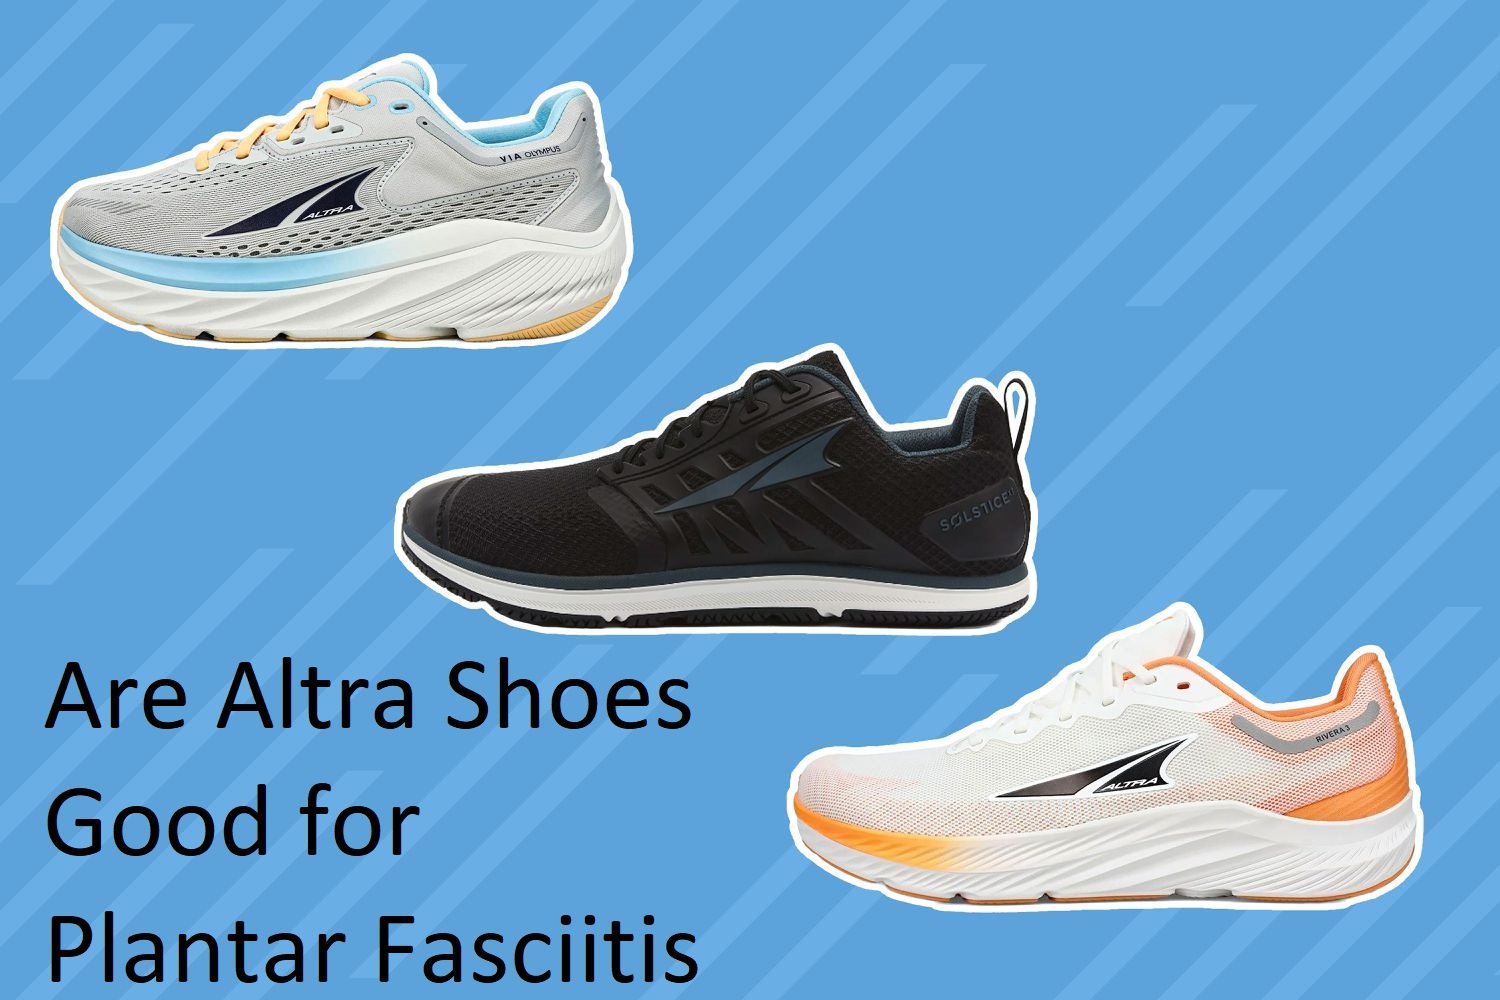 Are Altra Shoes Good for Plantar Fasciitis